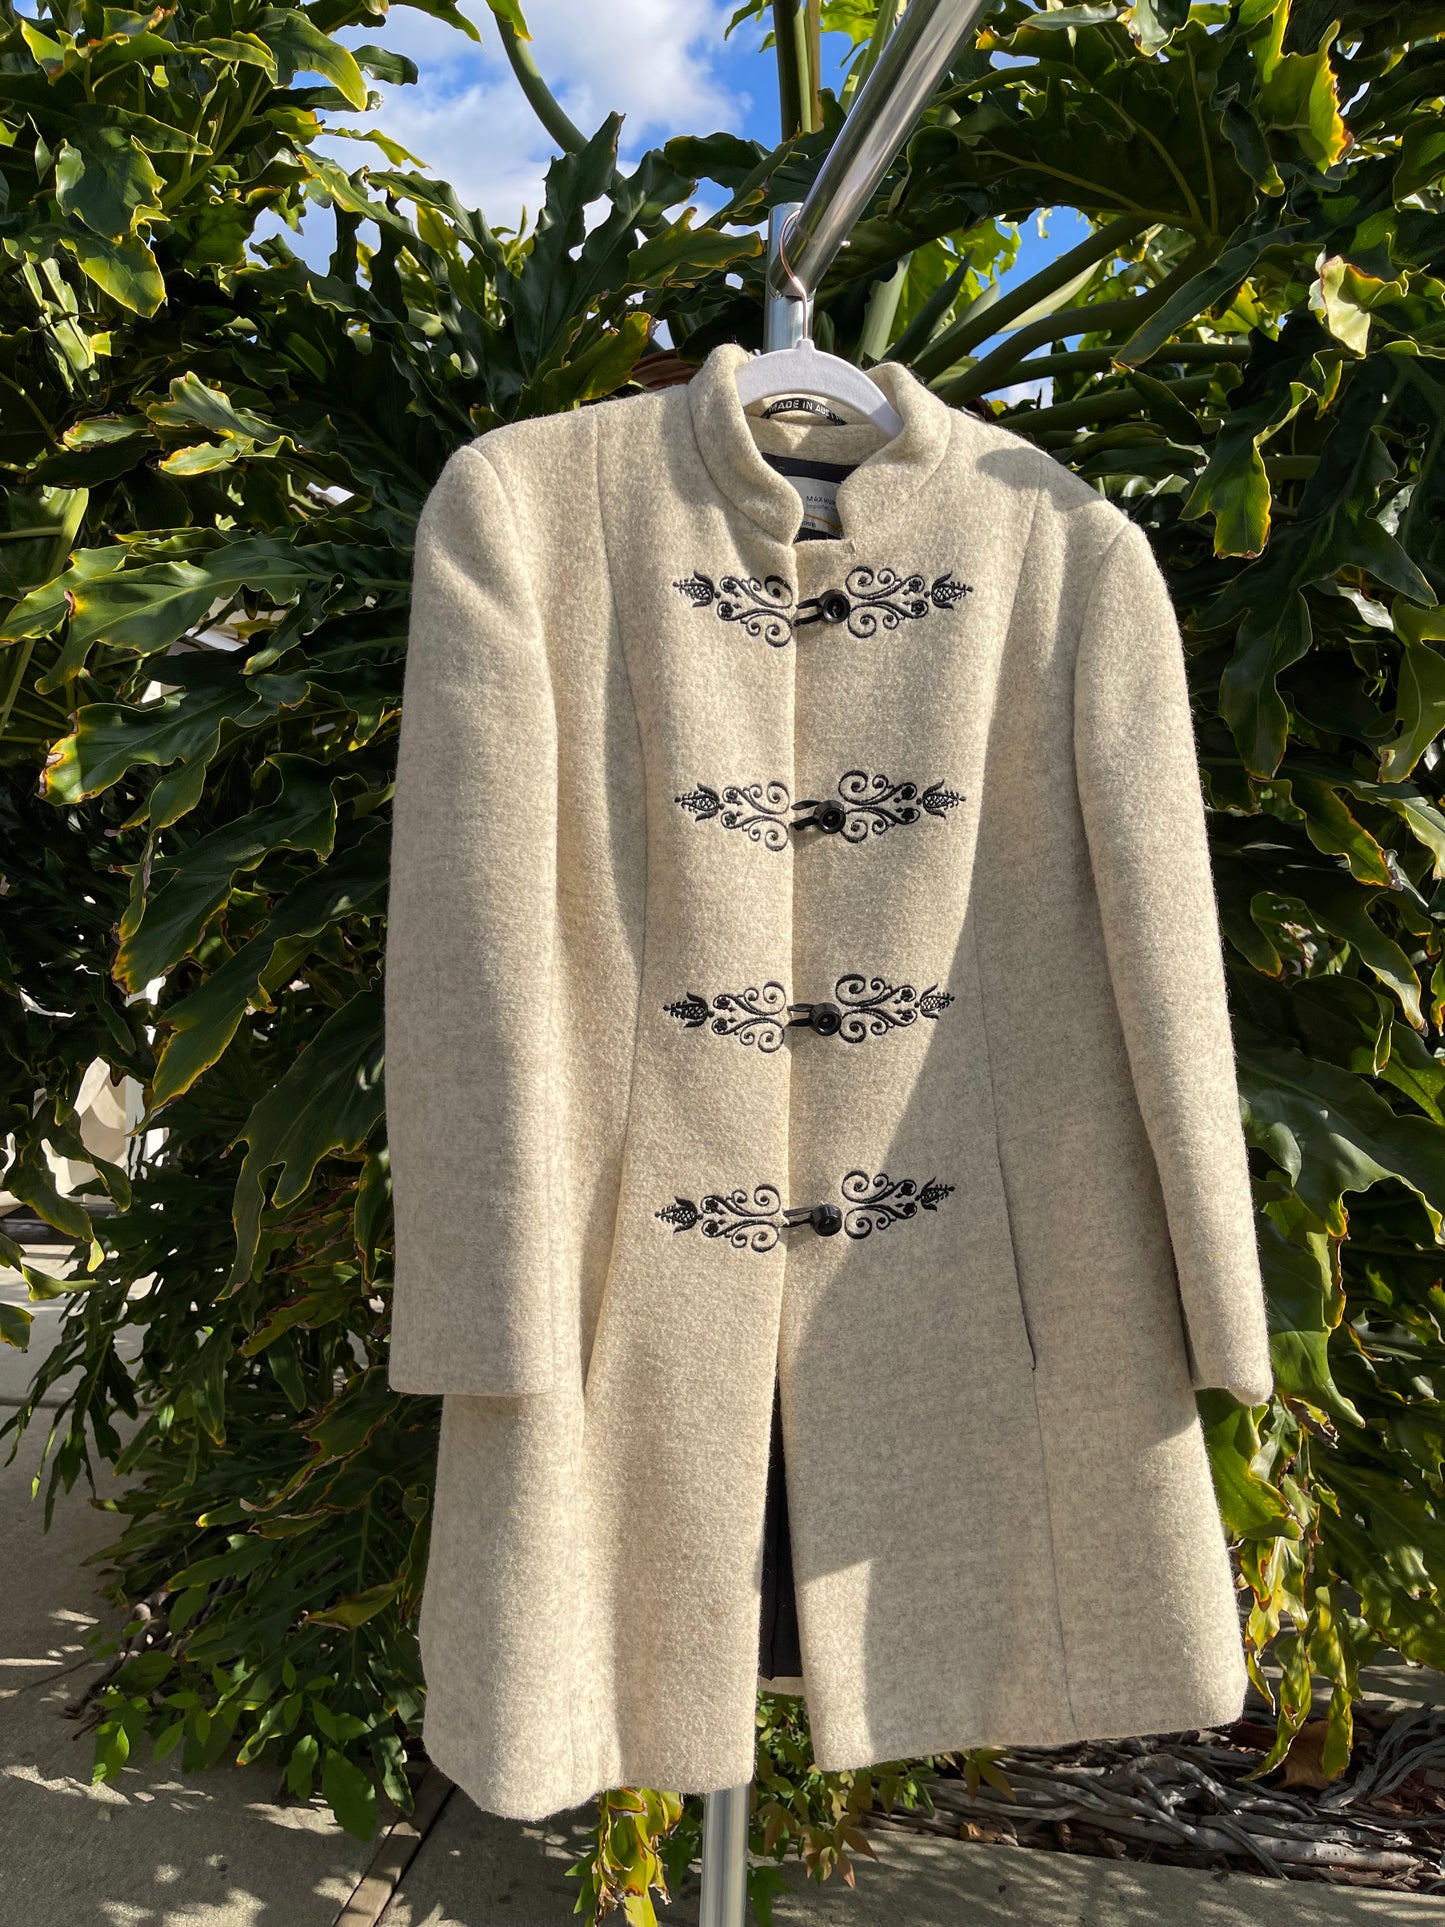 Vintage 50s / 60s Whimsical Made in Austria Wool Coat Fits Sizes XS-SM